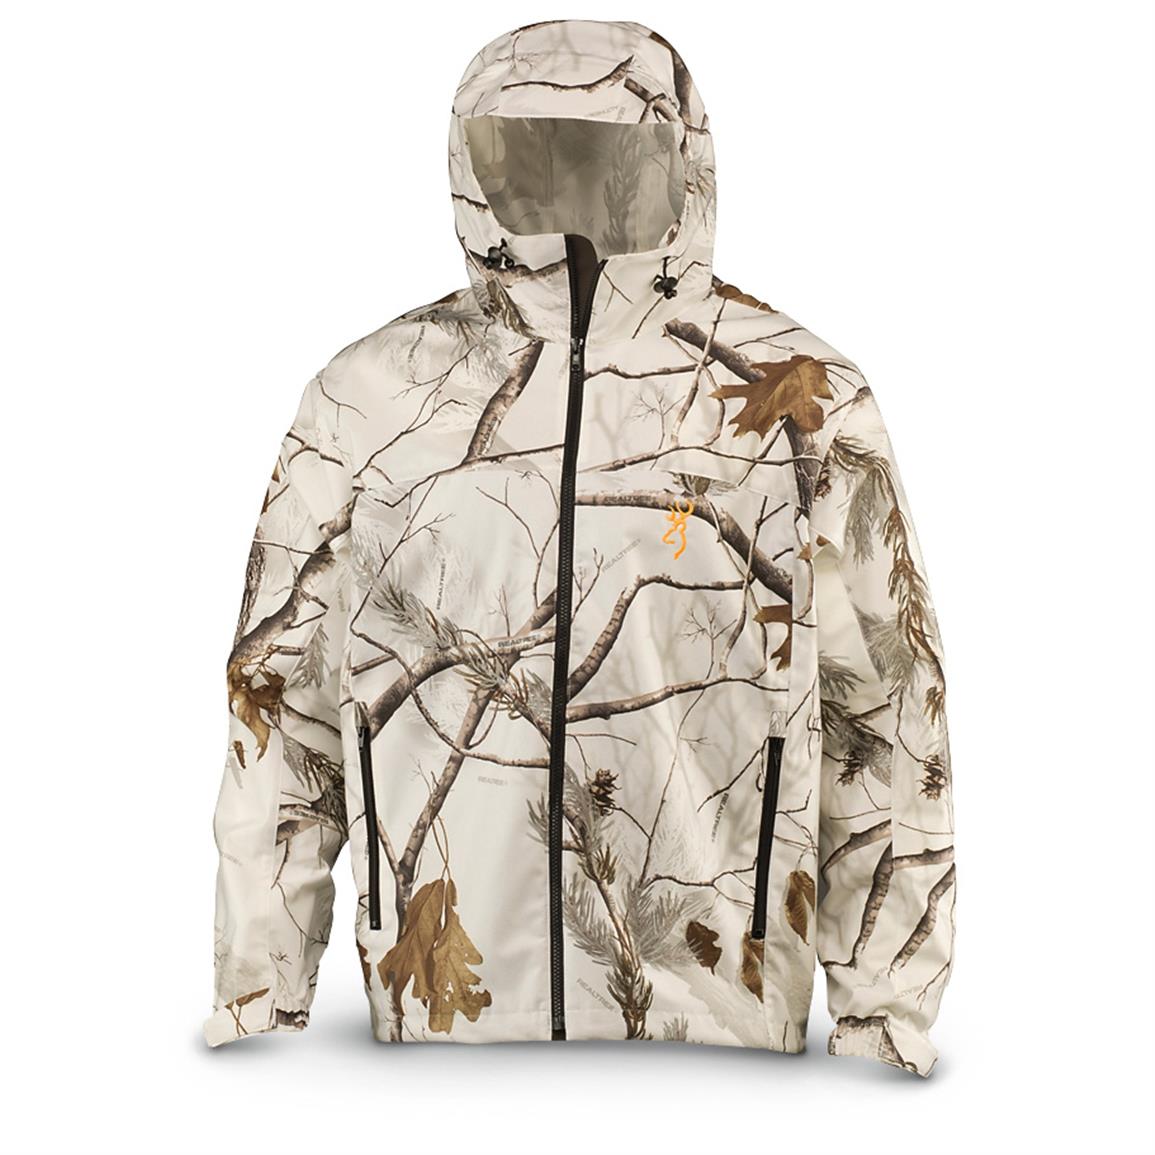 Browning Snow Camo Parka 597489, Camo Jackets at Sportsman's Guide